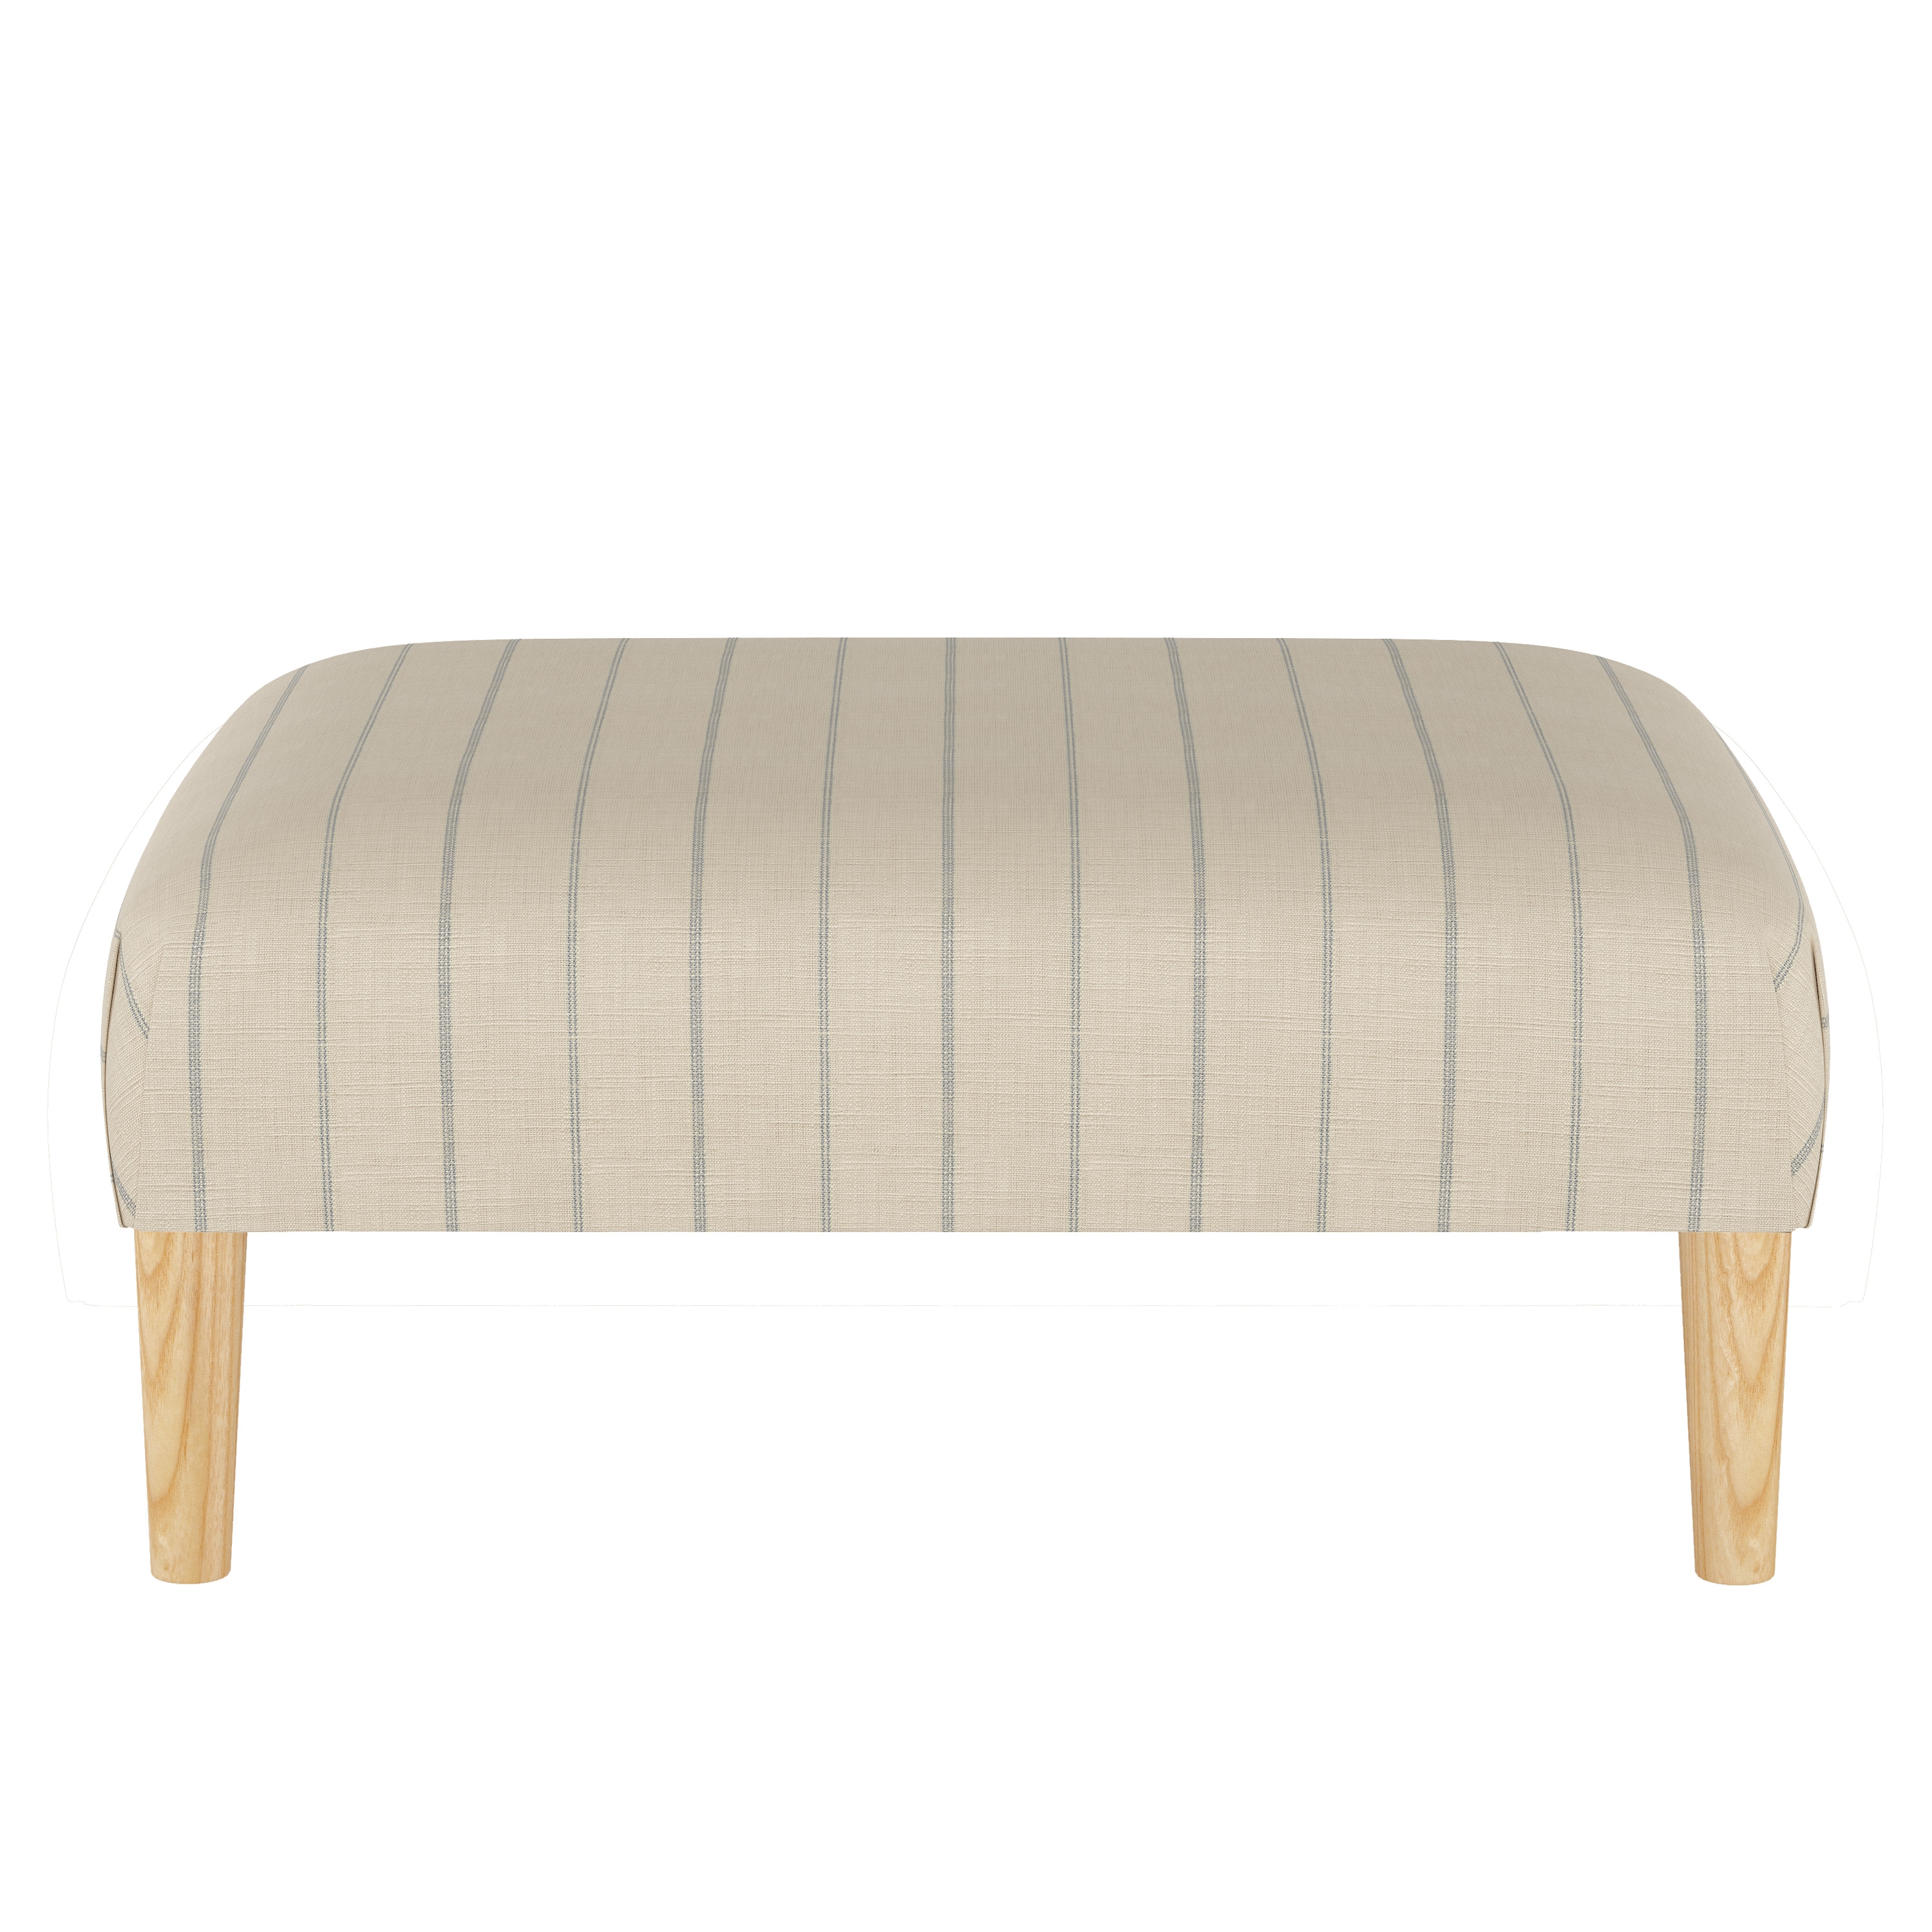 Algren Cocktail Ottoman with Cone Legs in Fritz Sky - Image 1